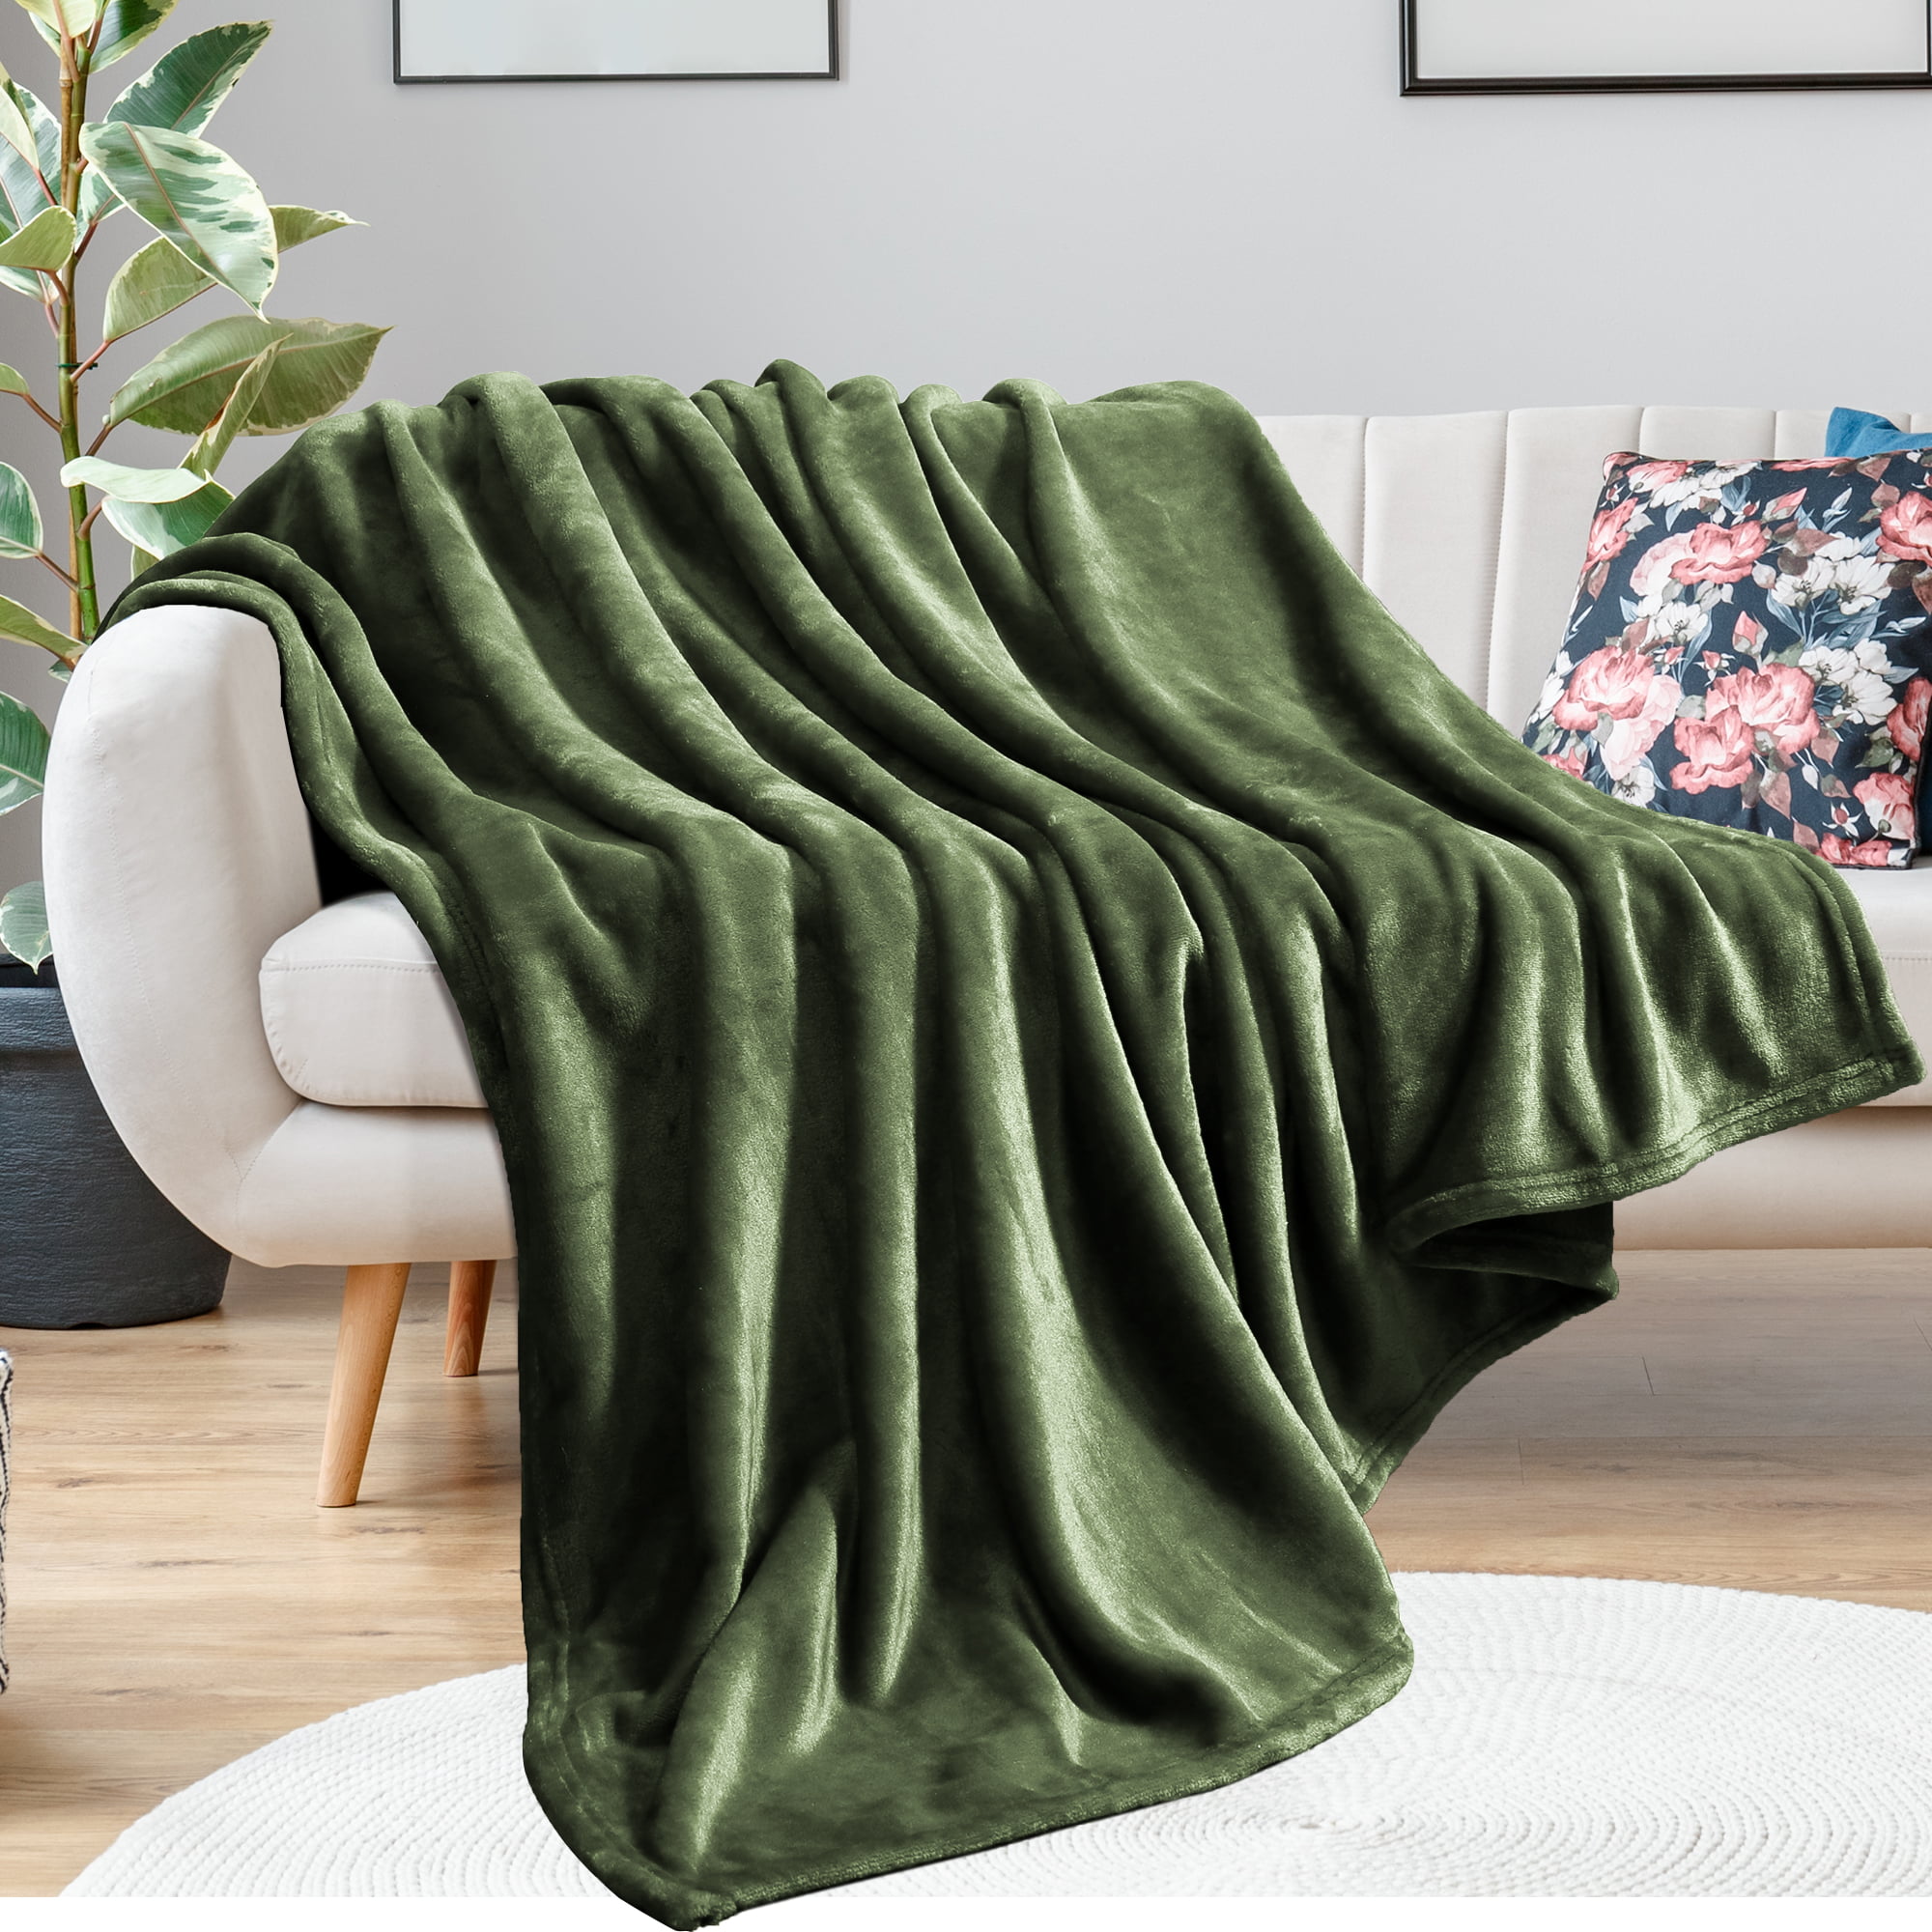 Bohemian Soft Plush Flannel Blanket Throws Fuzzy Microfiber for Bed/Couch/Sofa/Office/Camping Flannel Sherpa Throw International Women's Day 43.5'' x 60'' 